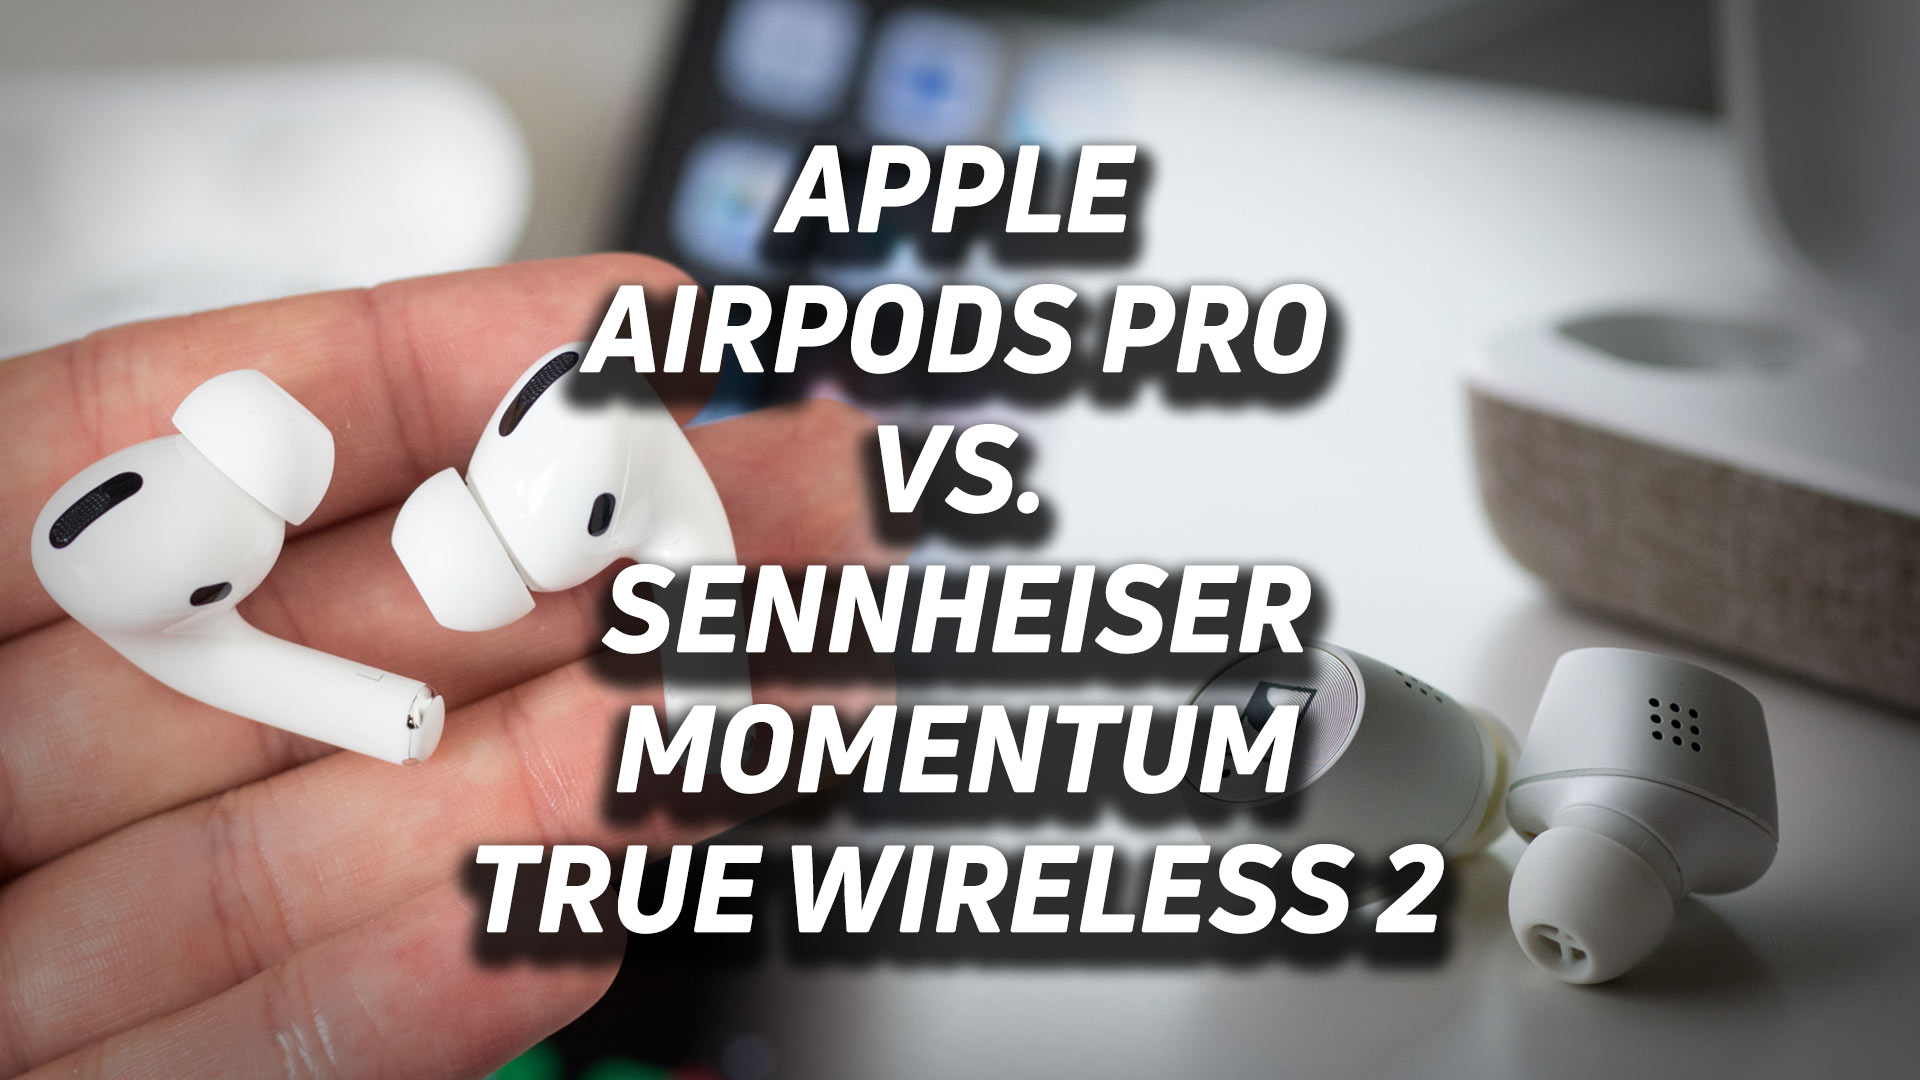 A blended image of the Apple AirPods Pro vs Sennheiser MOMENTUM True Wireless 2 noise canceling true wireless earbuds.